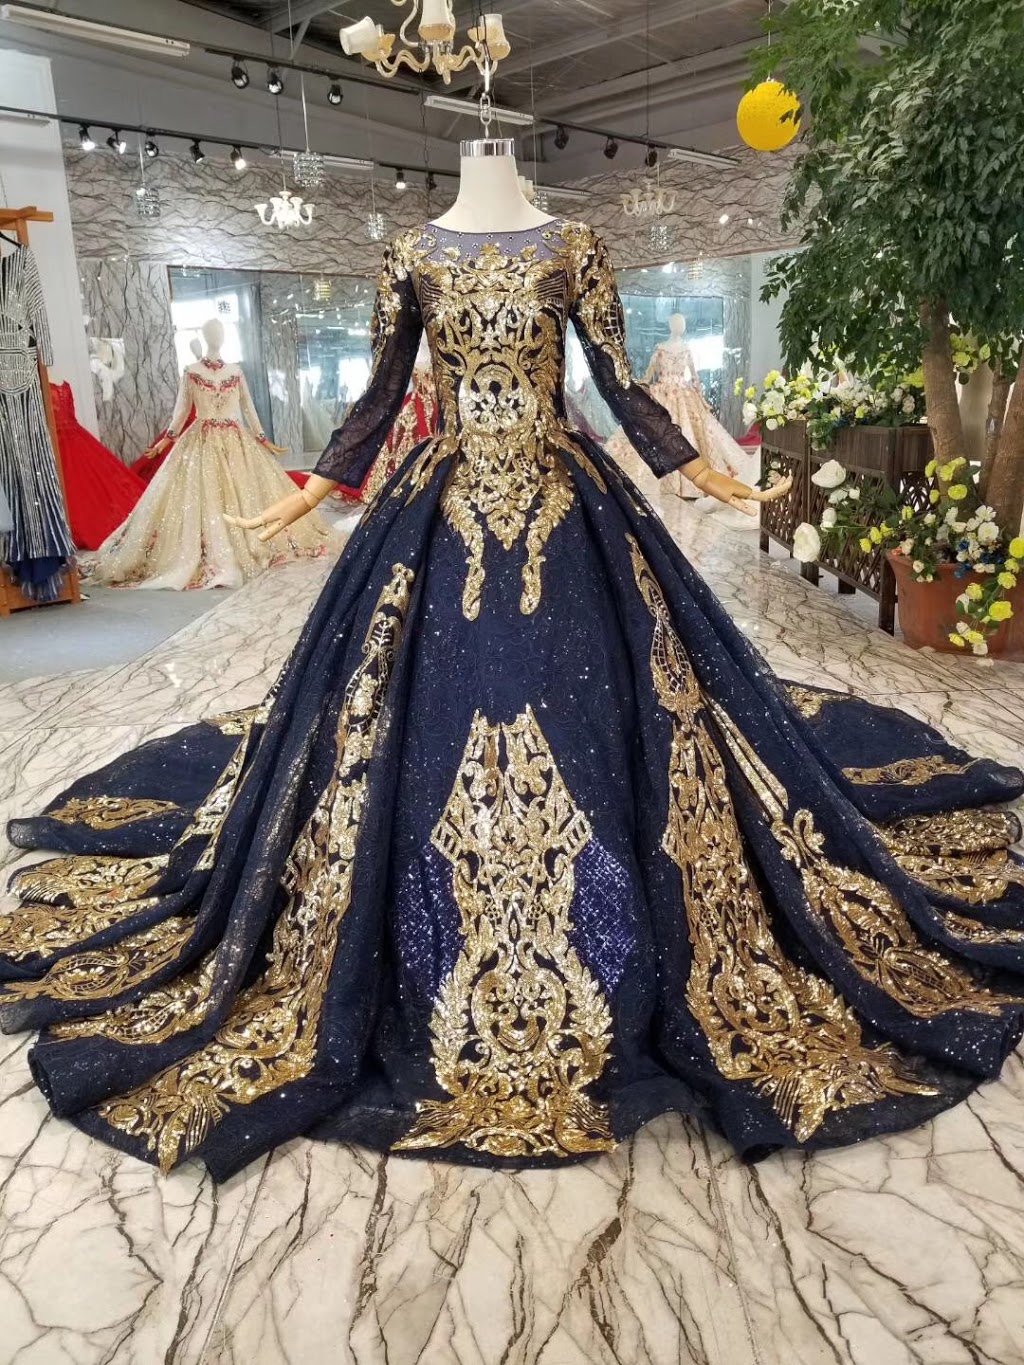 Sunflower bridal inc. | clothing store | 812 St Clair Ave W, Toronto, ON M6C 1B6, Canada | 4379722666 OR +1 437-972-2666